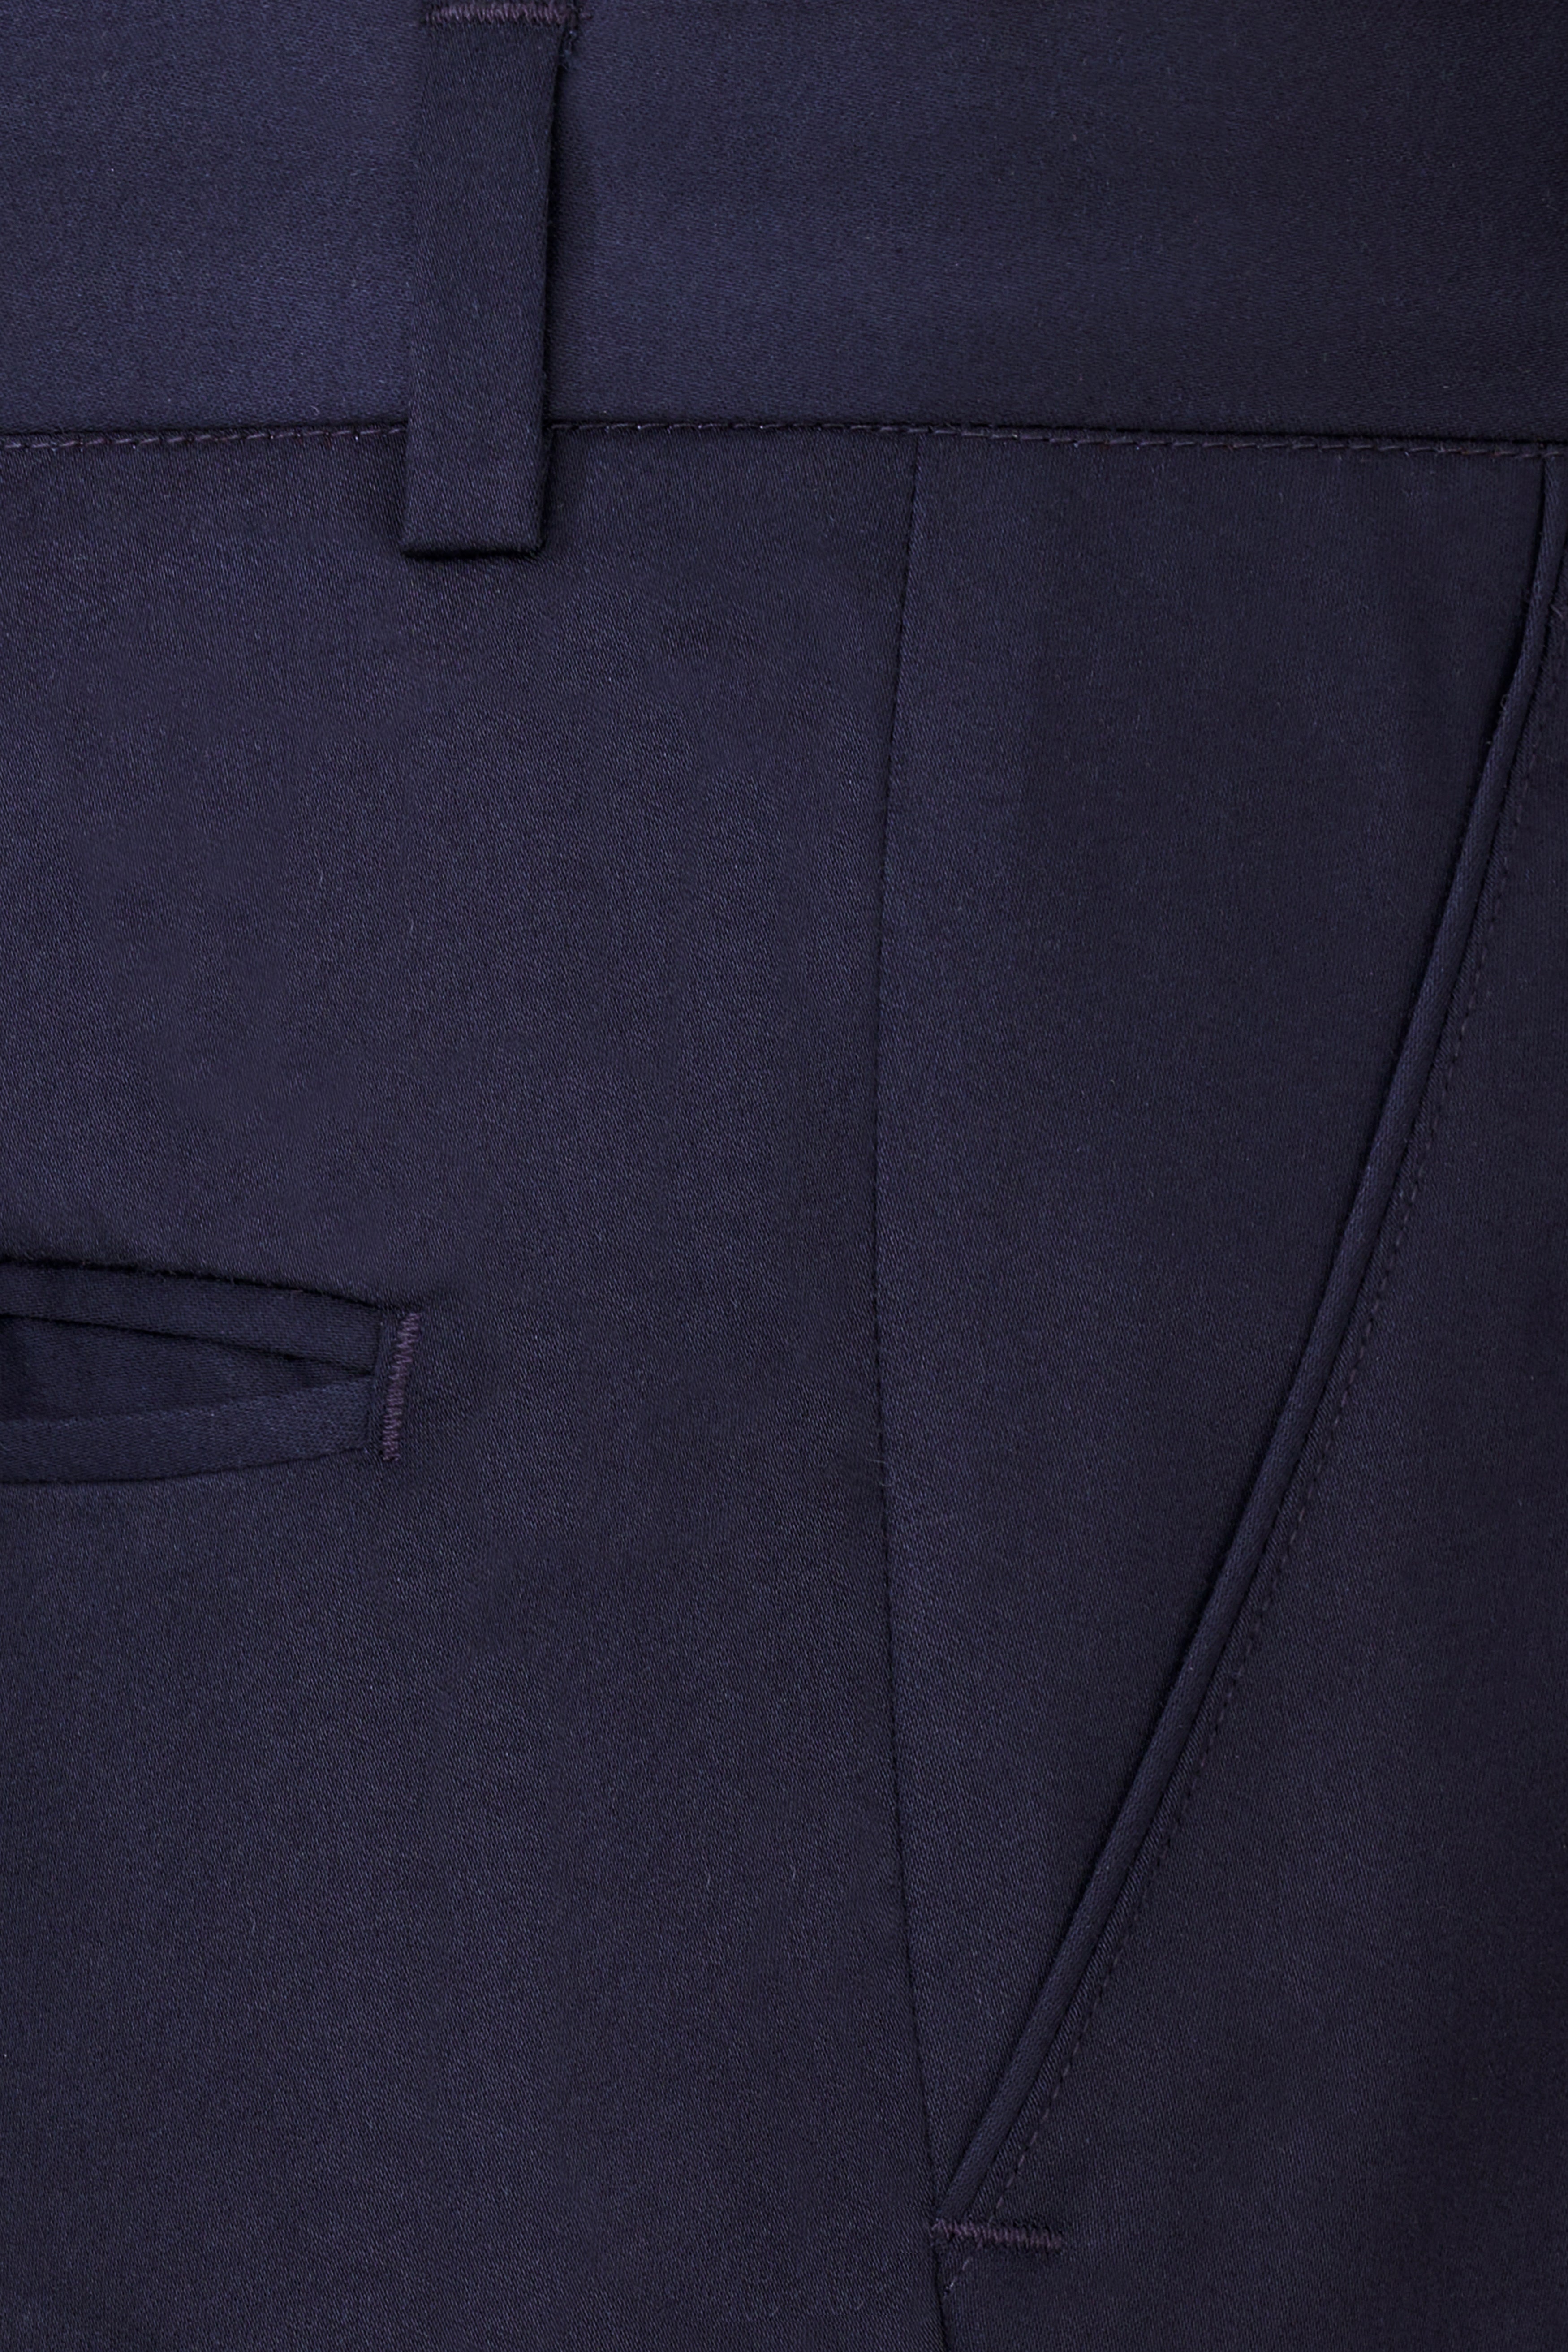 Navy Subtle Sheen Wool Blend Double Breasted Suit